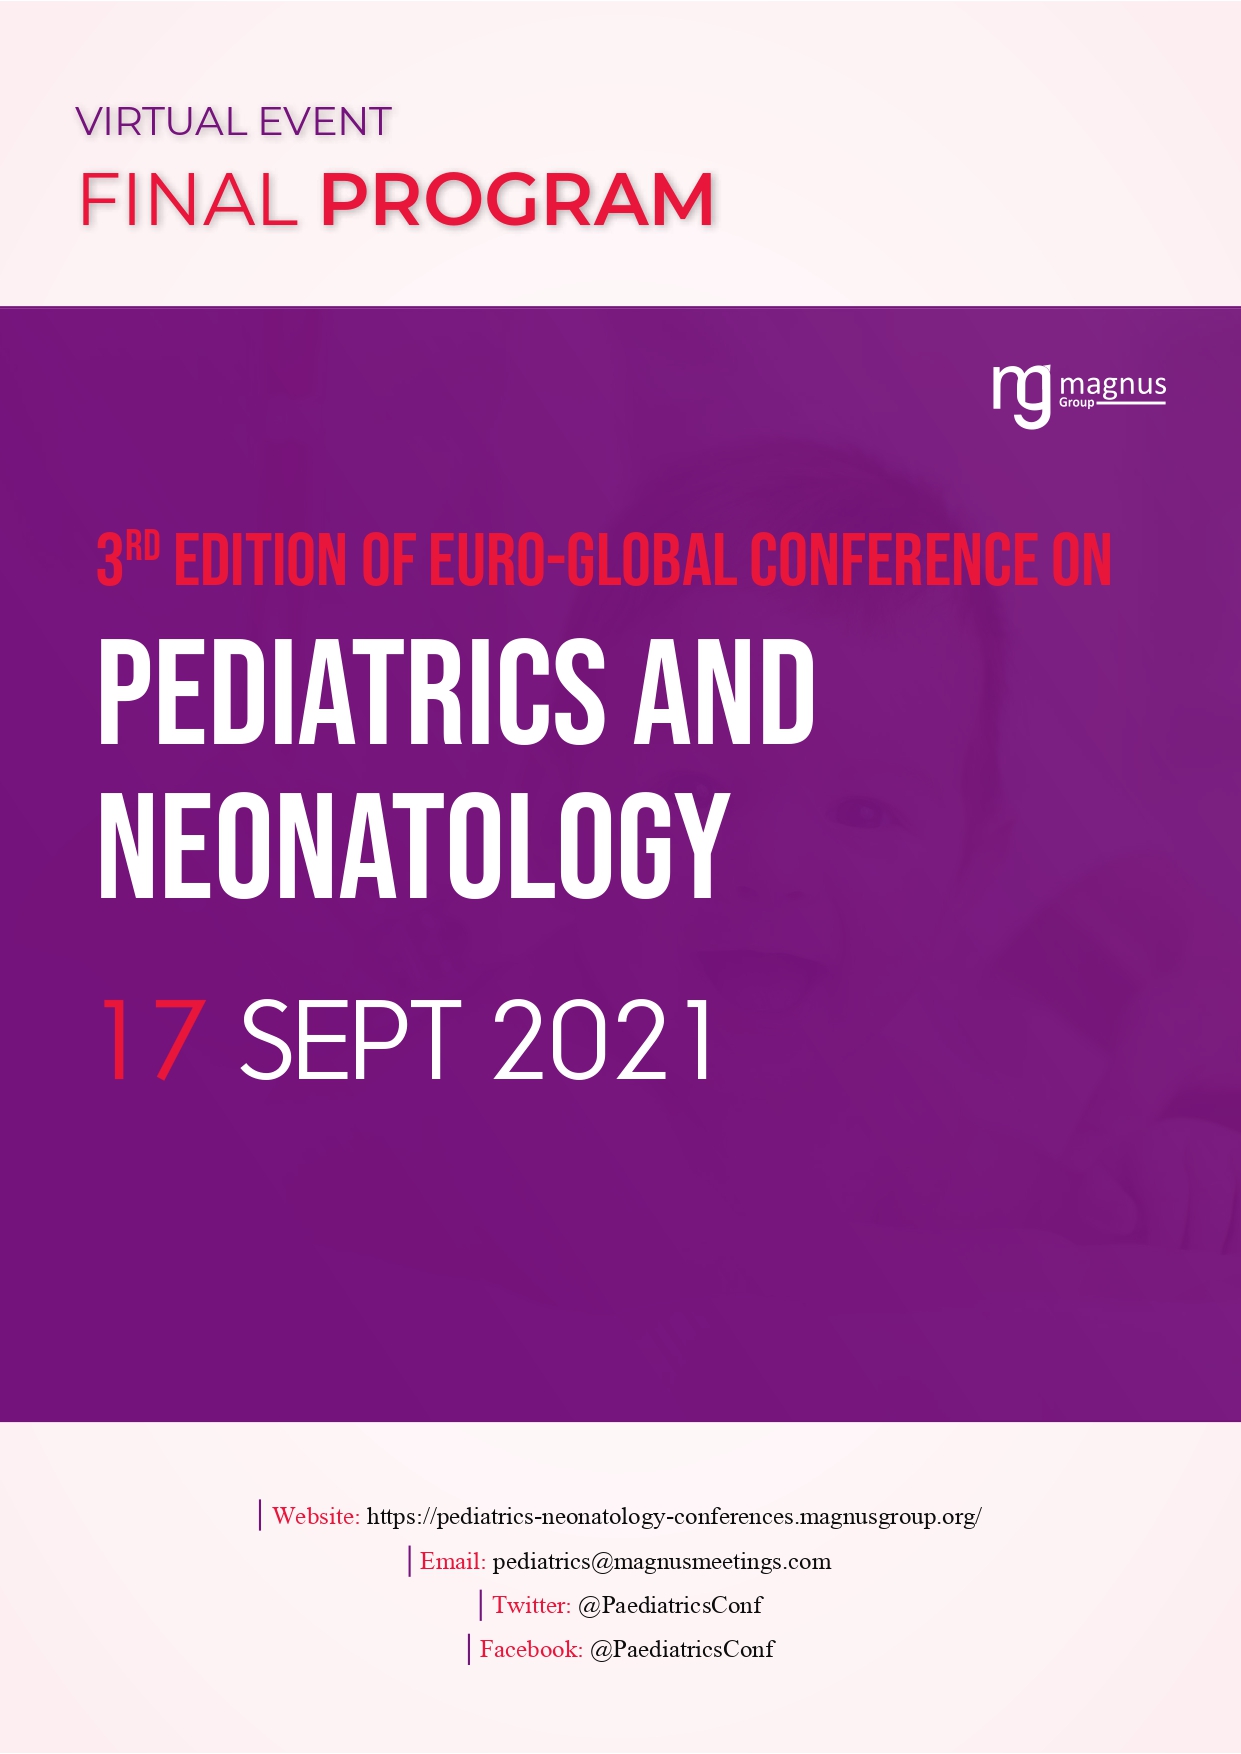 3rd Edition of Euro-Global Conference on Pediatrics and Neonatology | Online Event Program